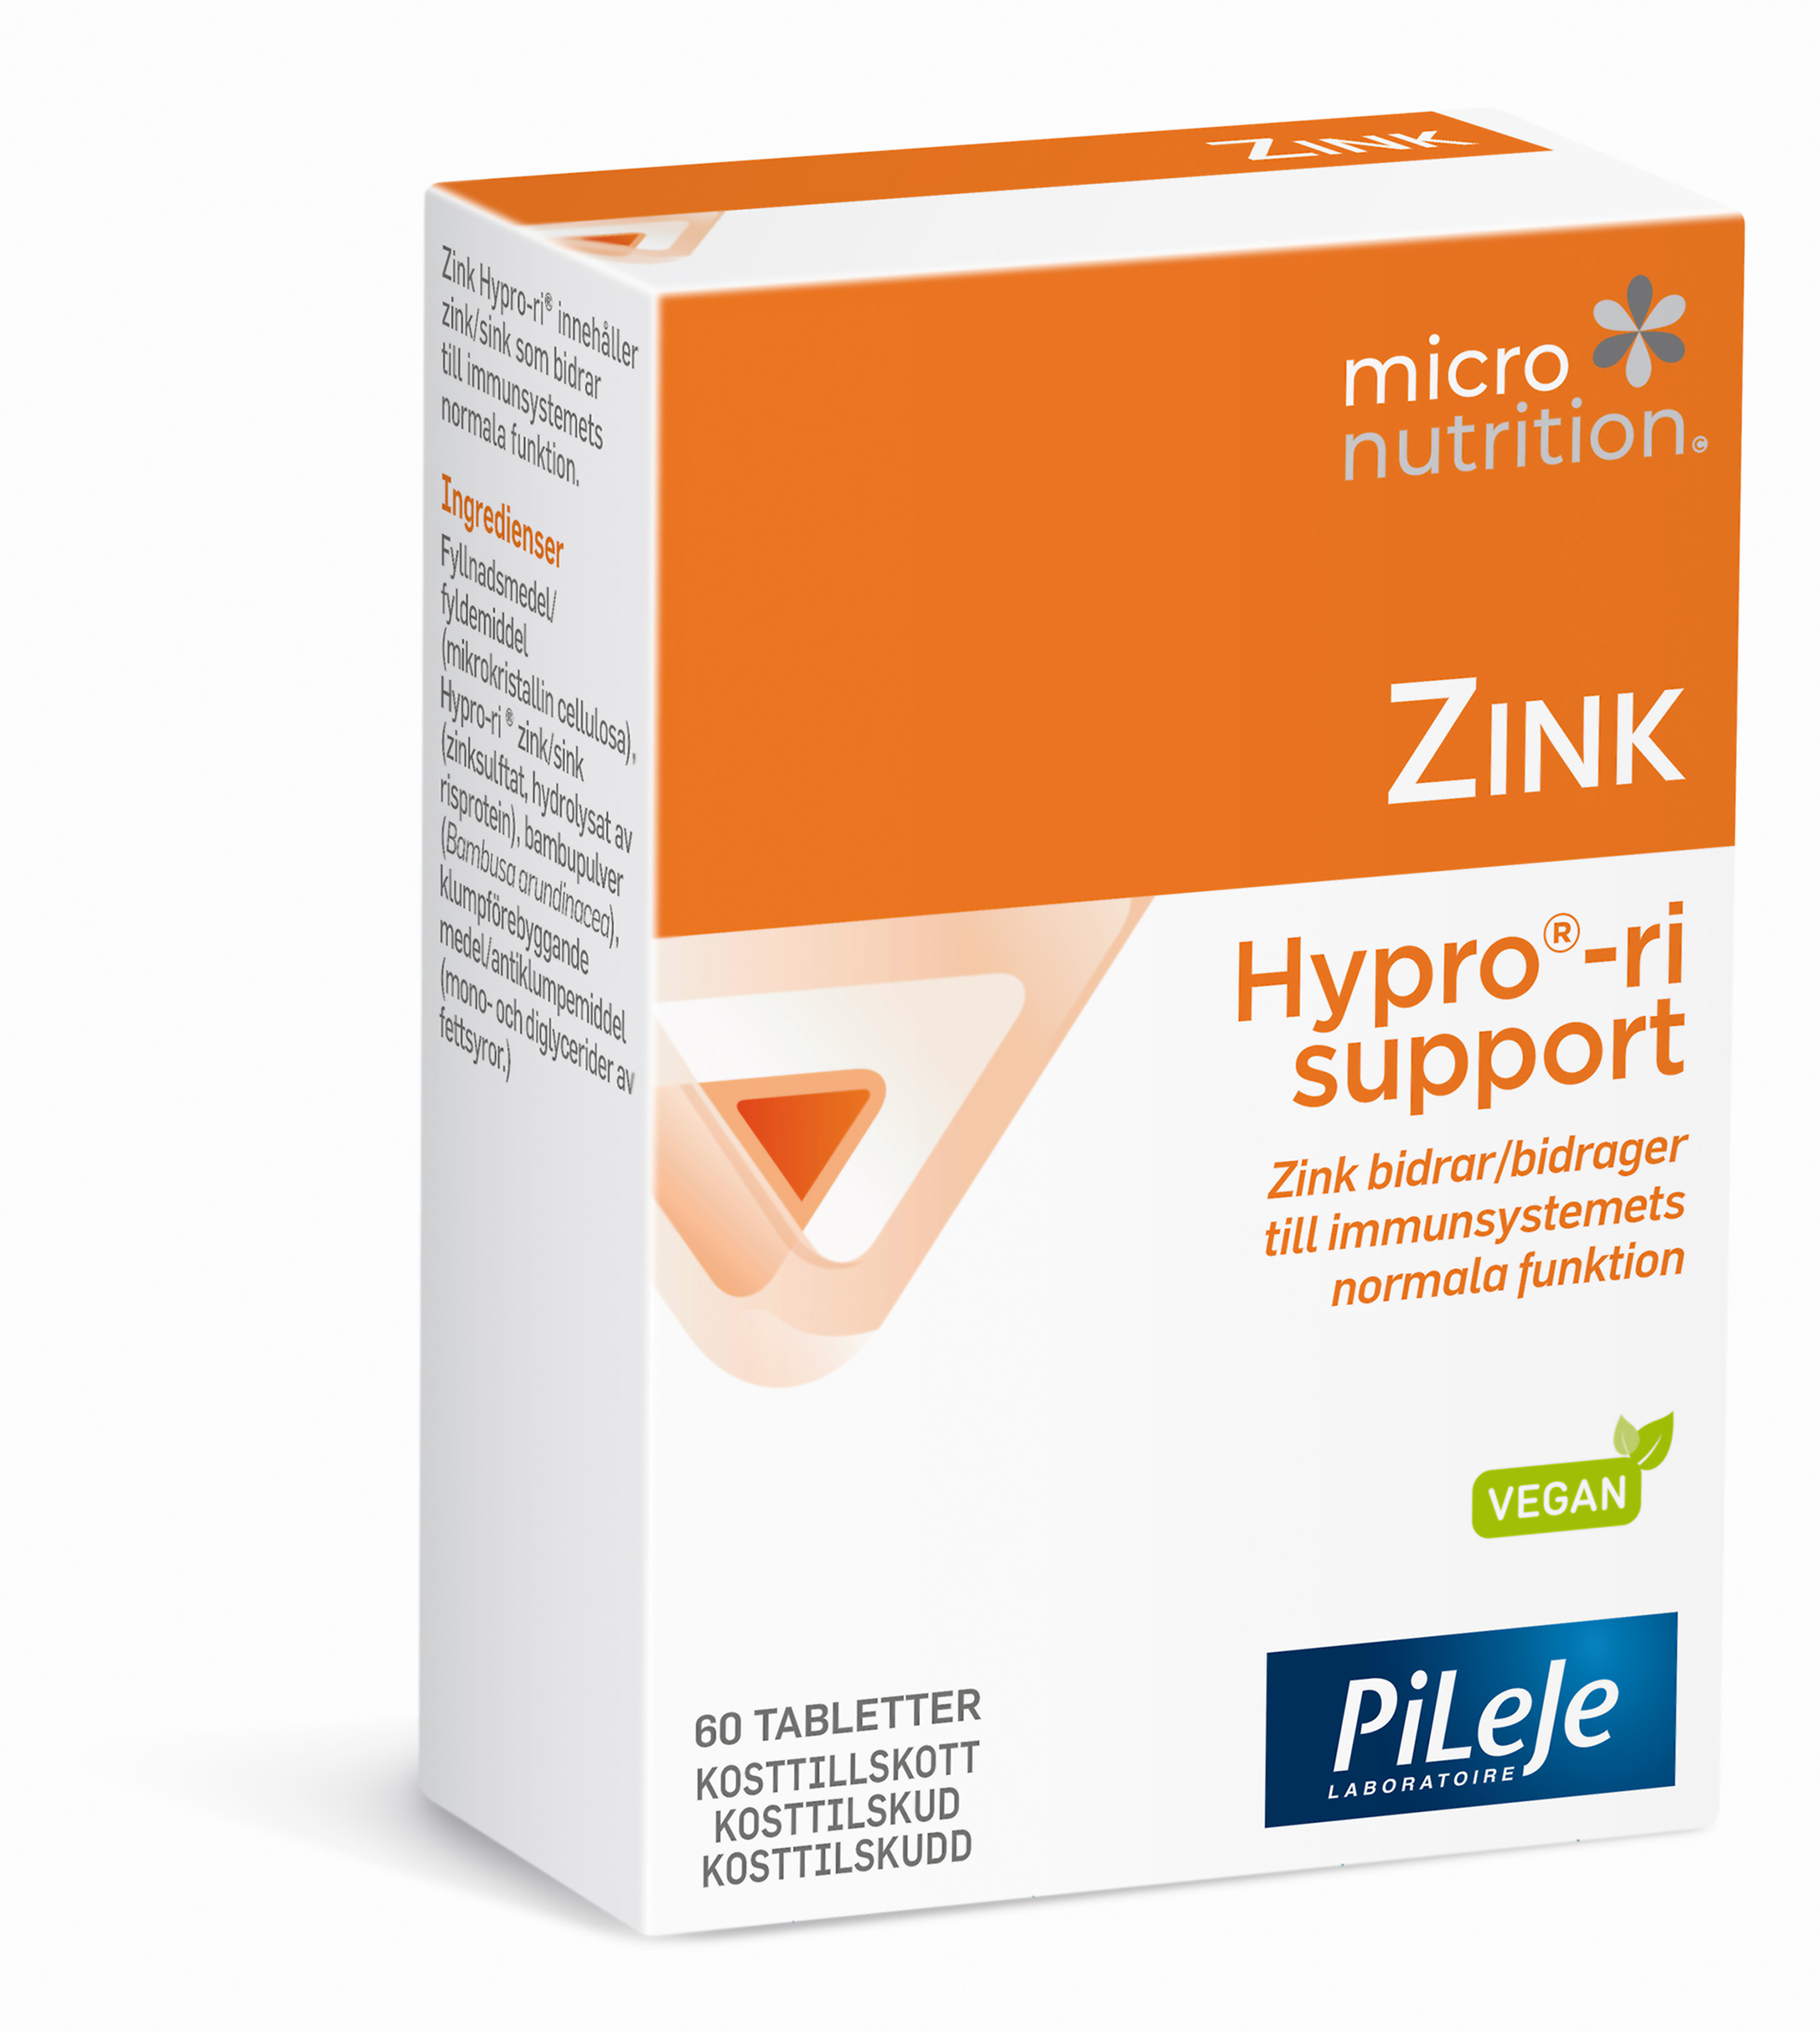 Micronutrition Zink Hypro-ri support 60 st